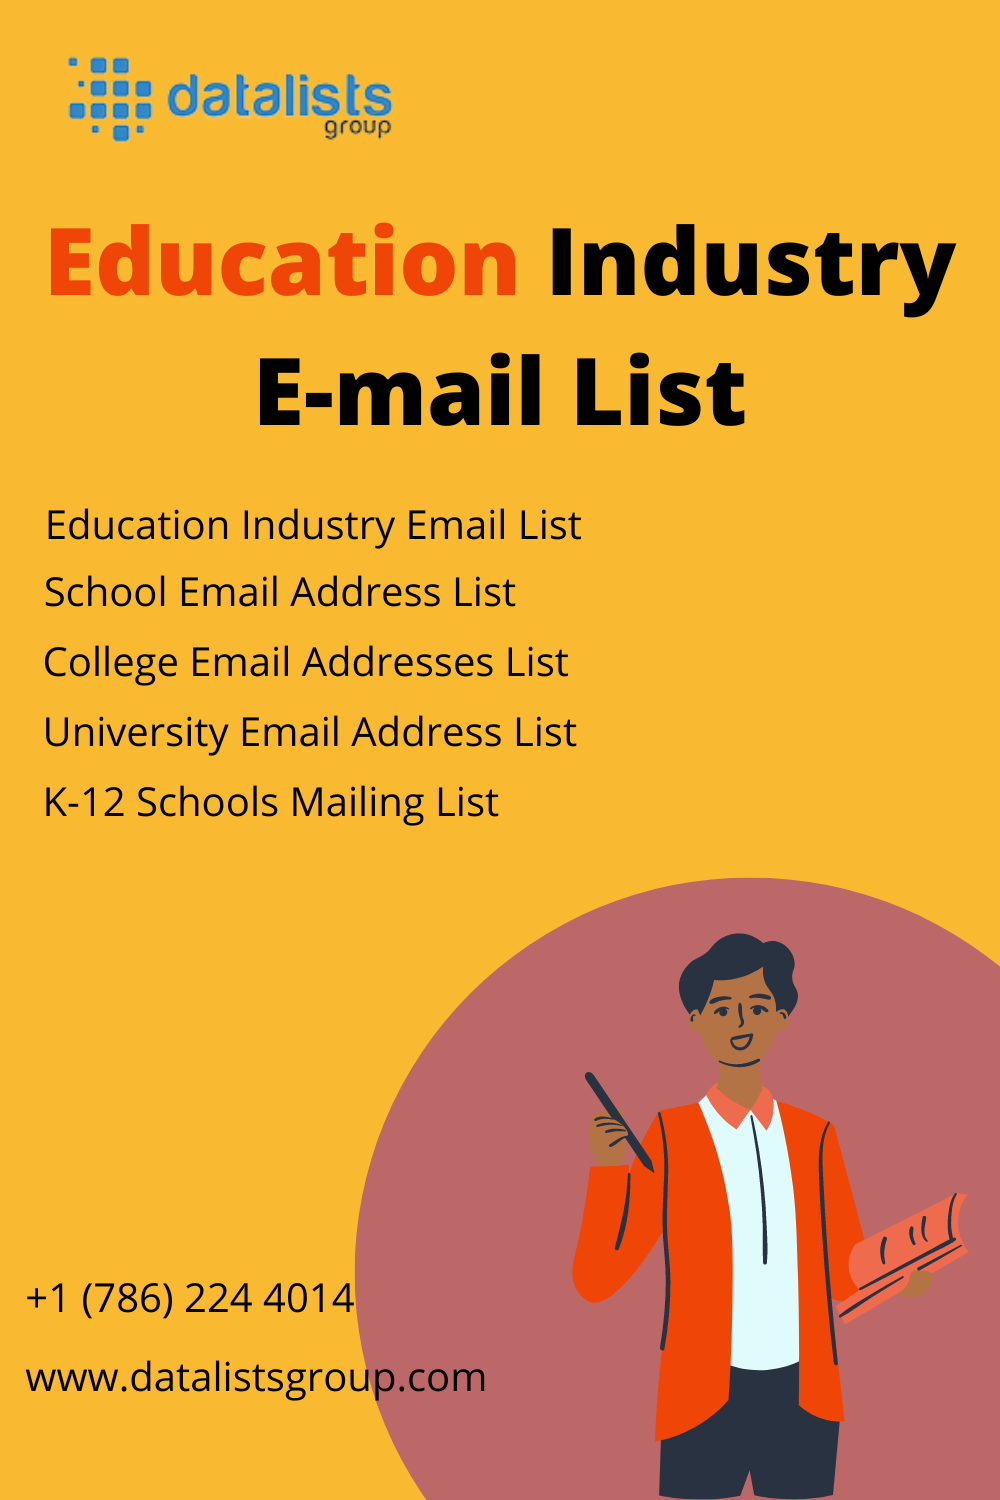 Explore: the education industry